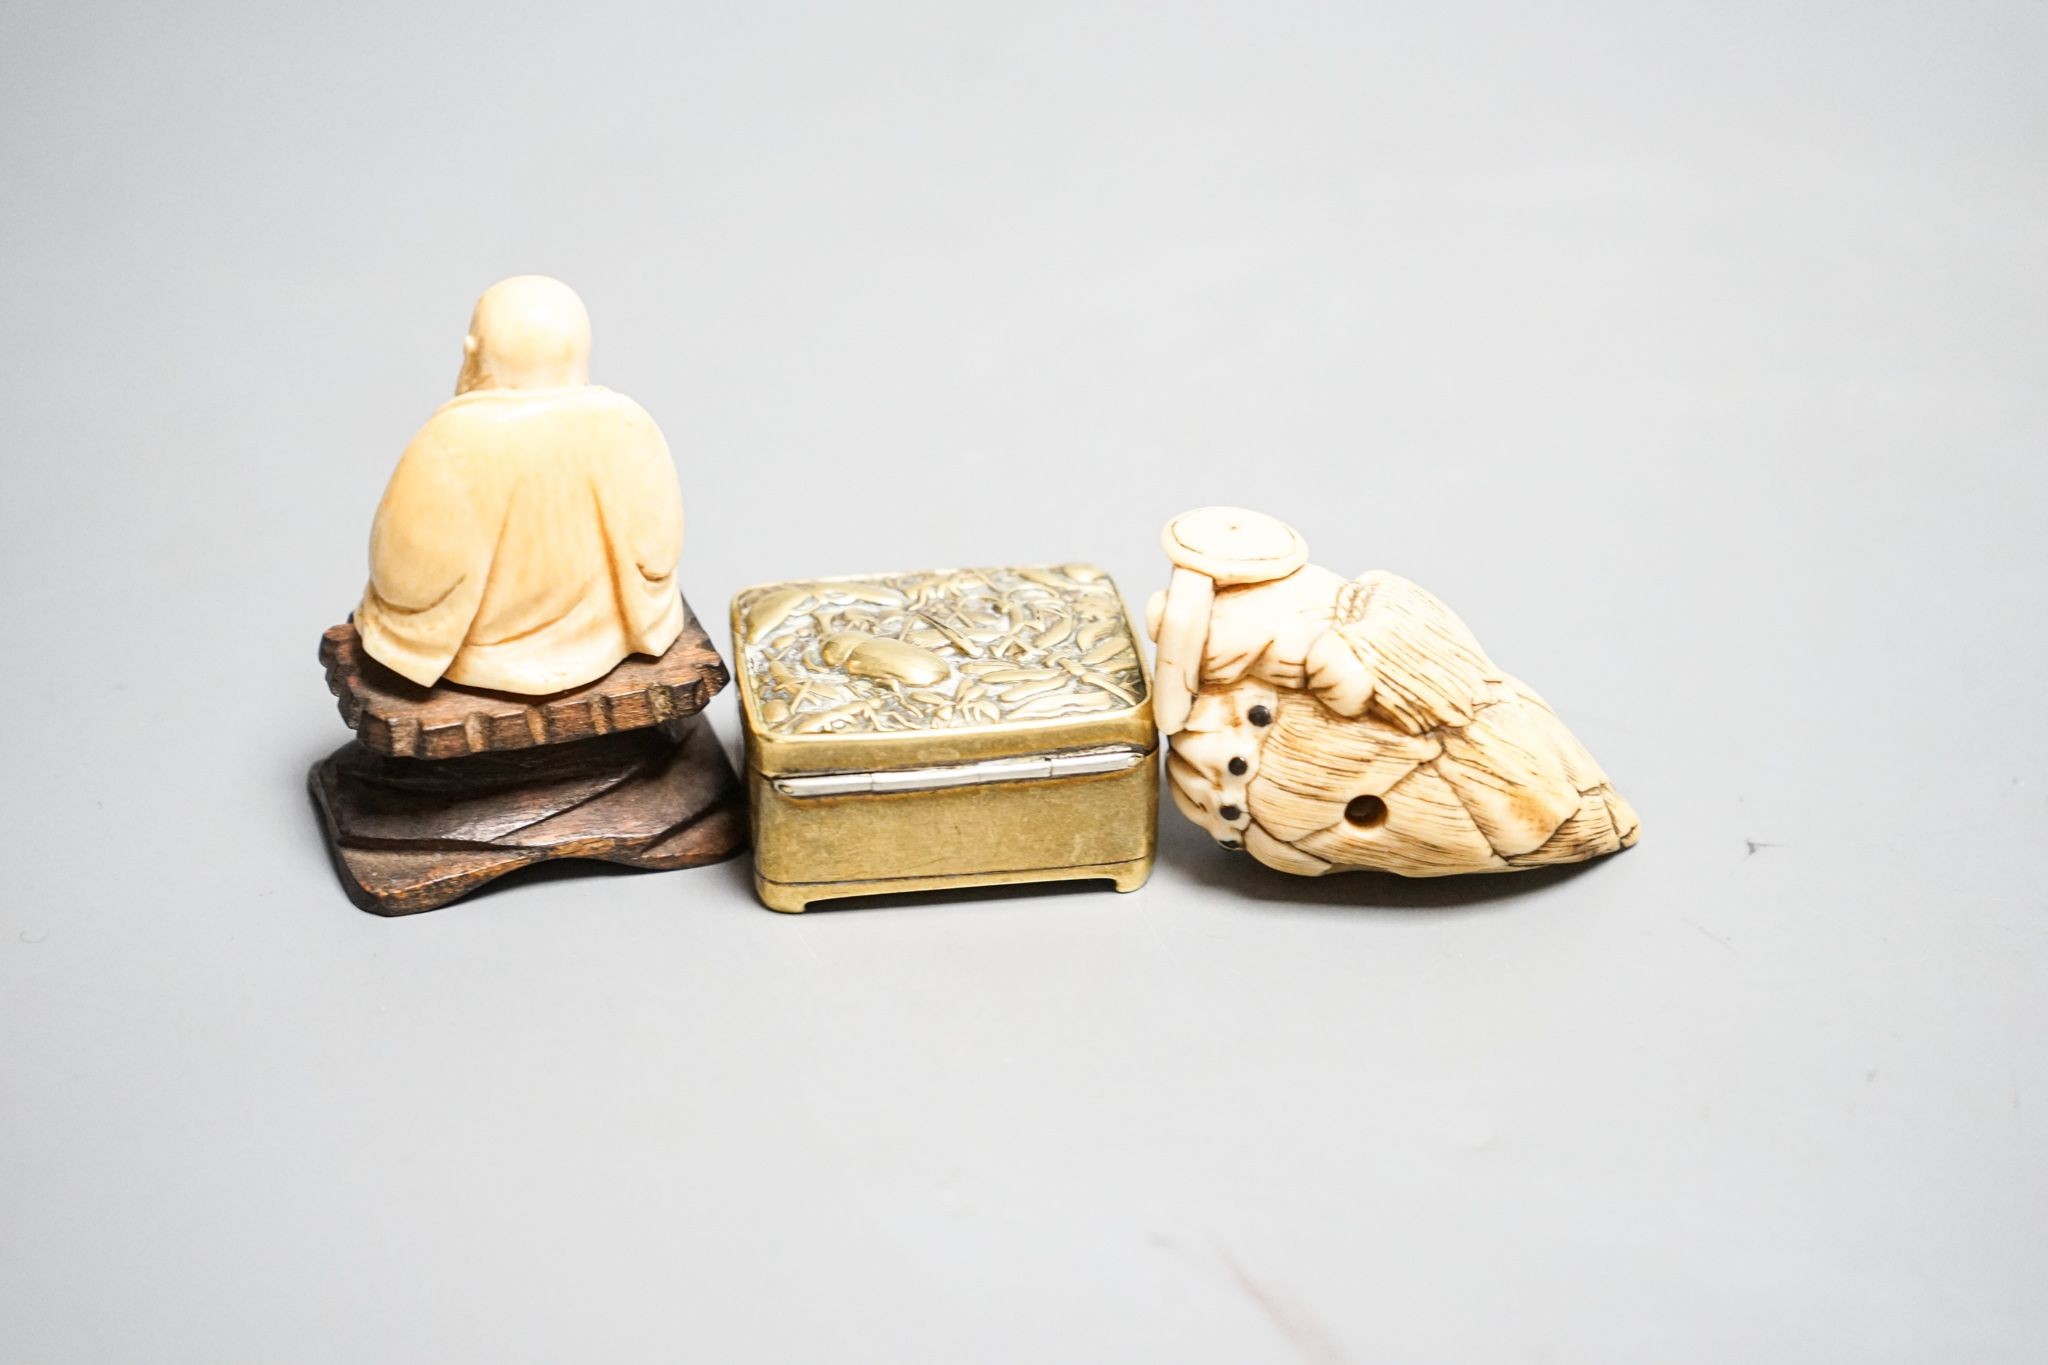 19th-century Japanese Ivory netsuke a man on a bamboo shoot, an ivory figure of Budai and a Japanese embossed brass box 5cm